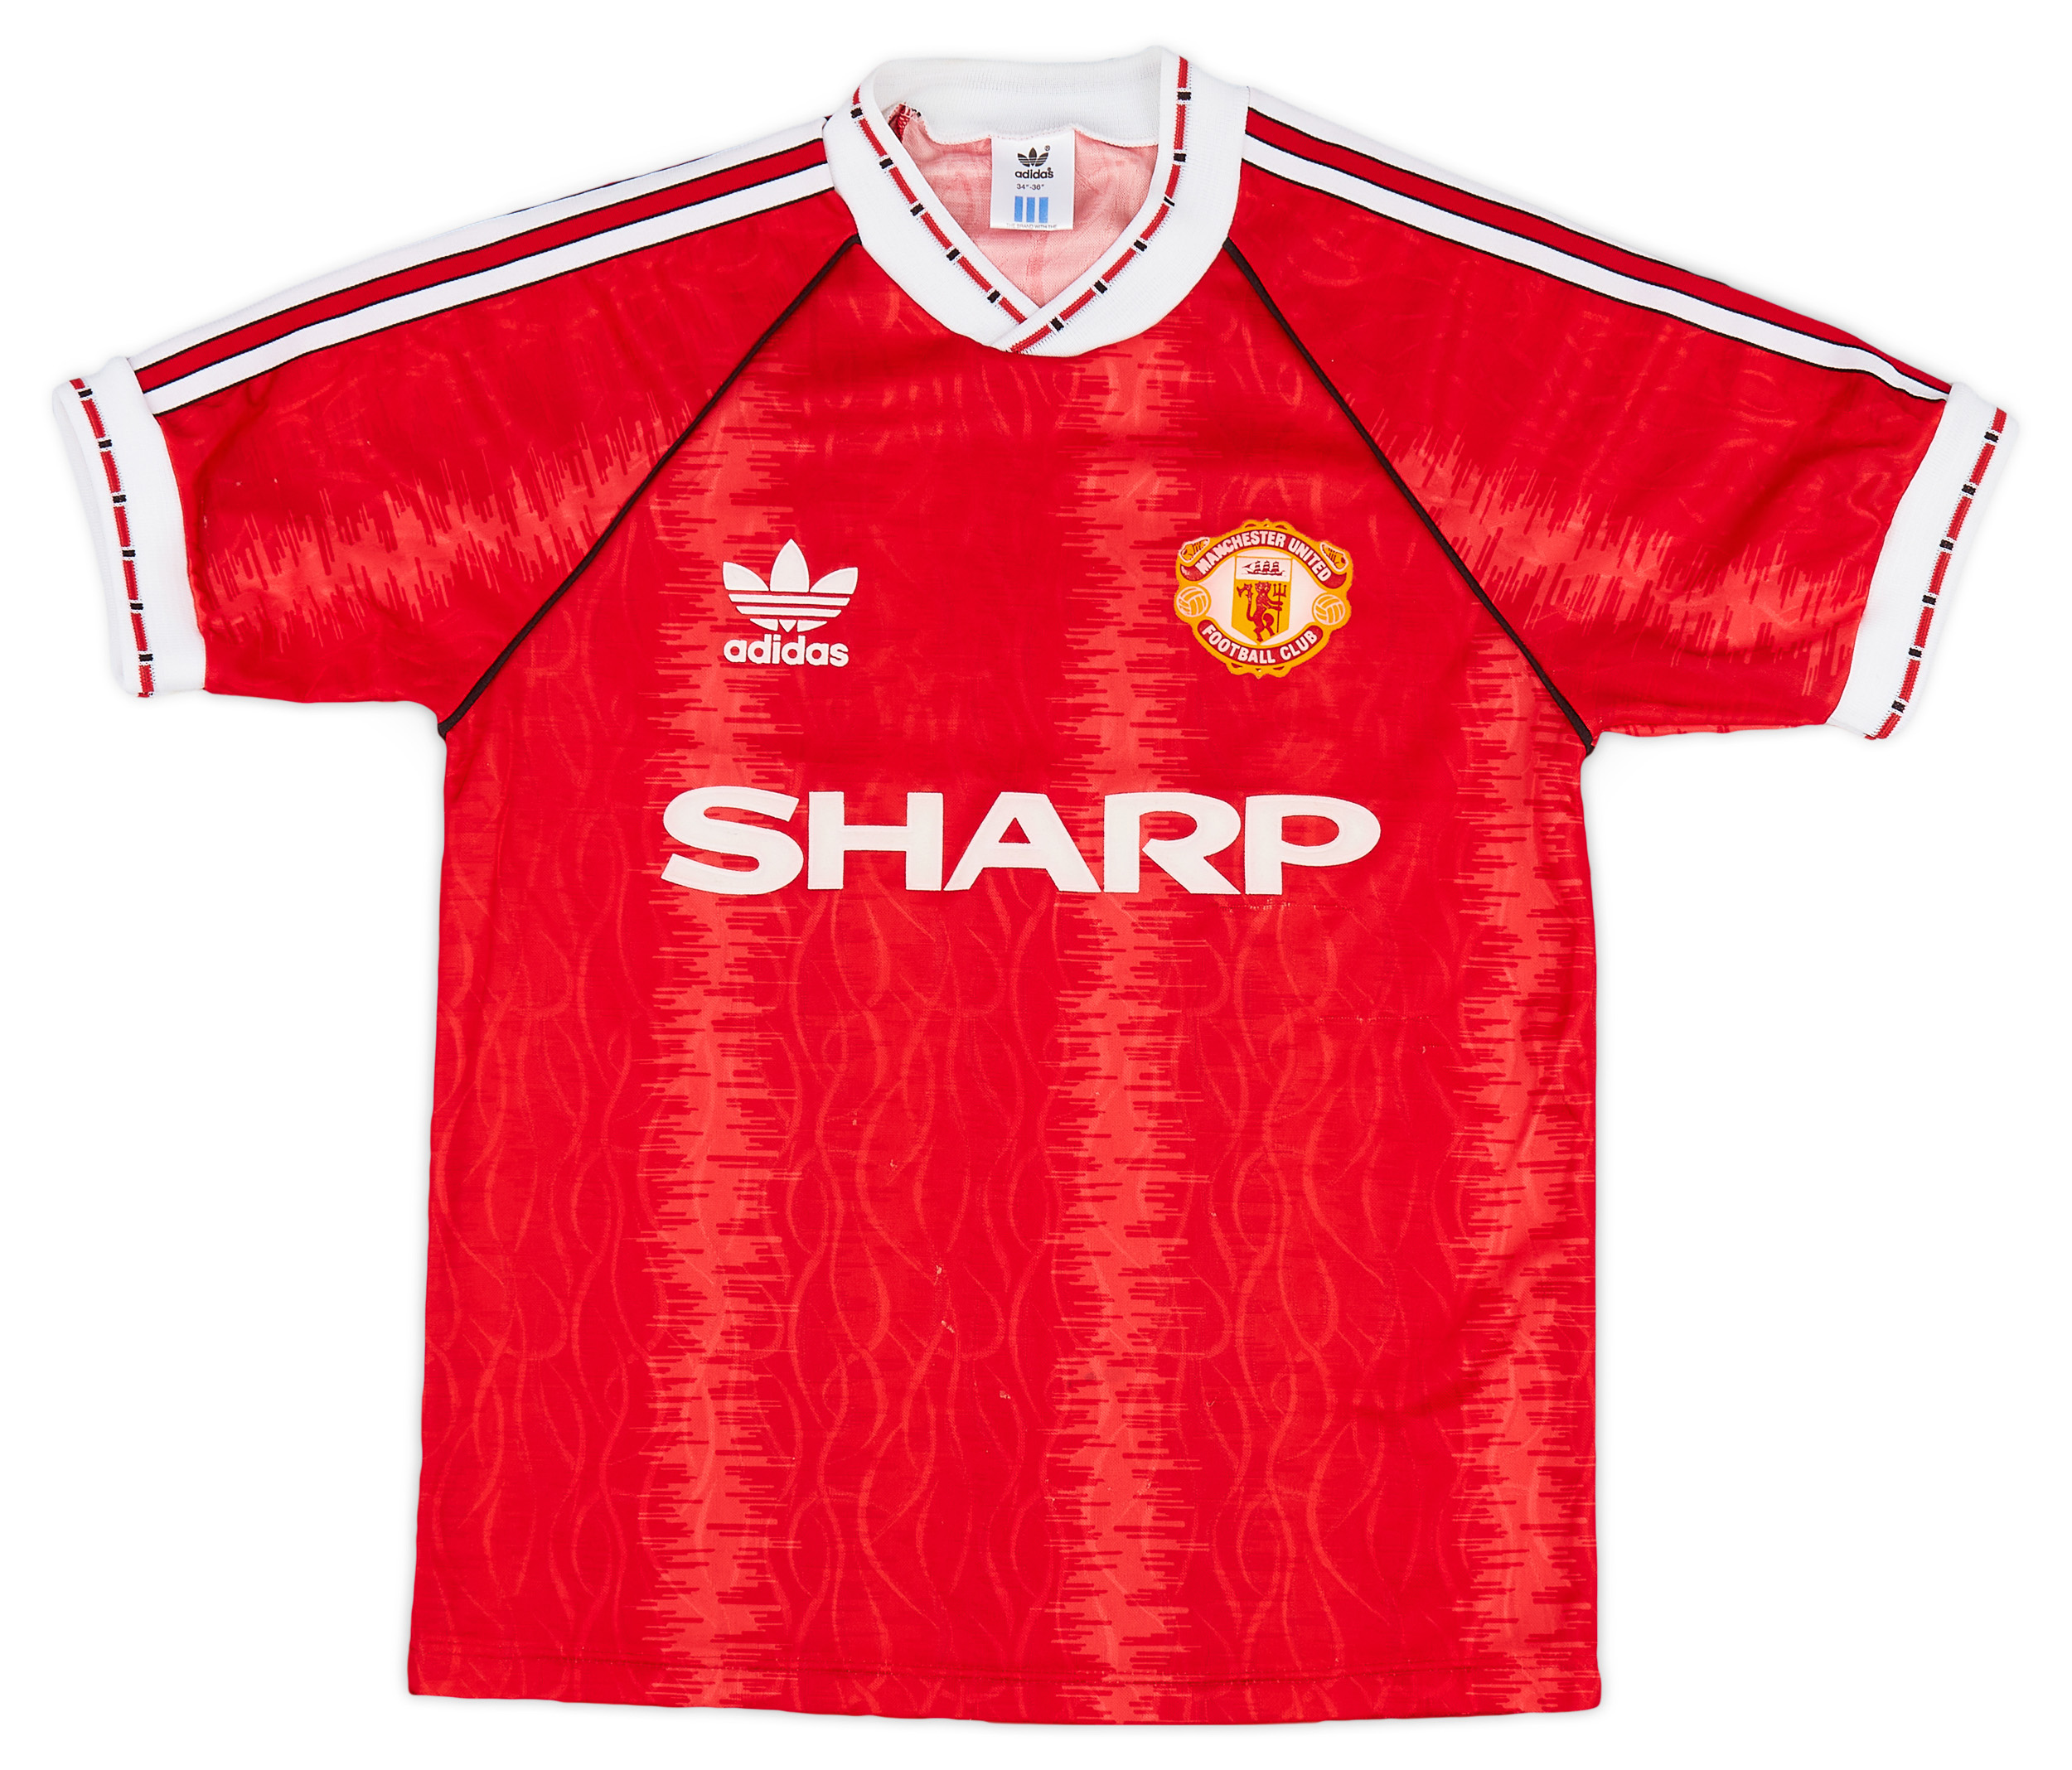 1990-92 Manchester United Home Shirt - 8/10 - ()